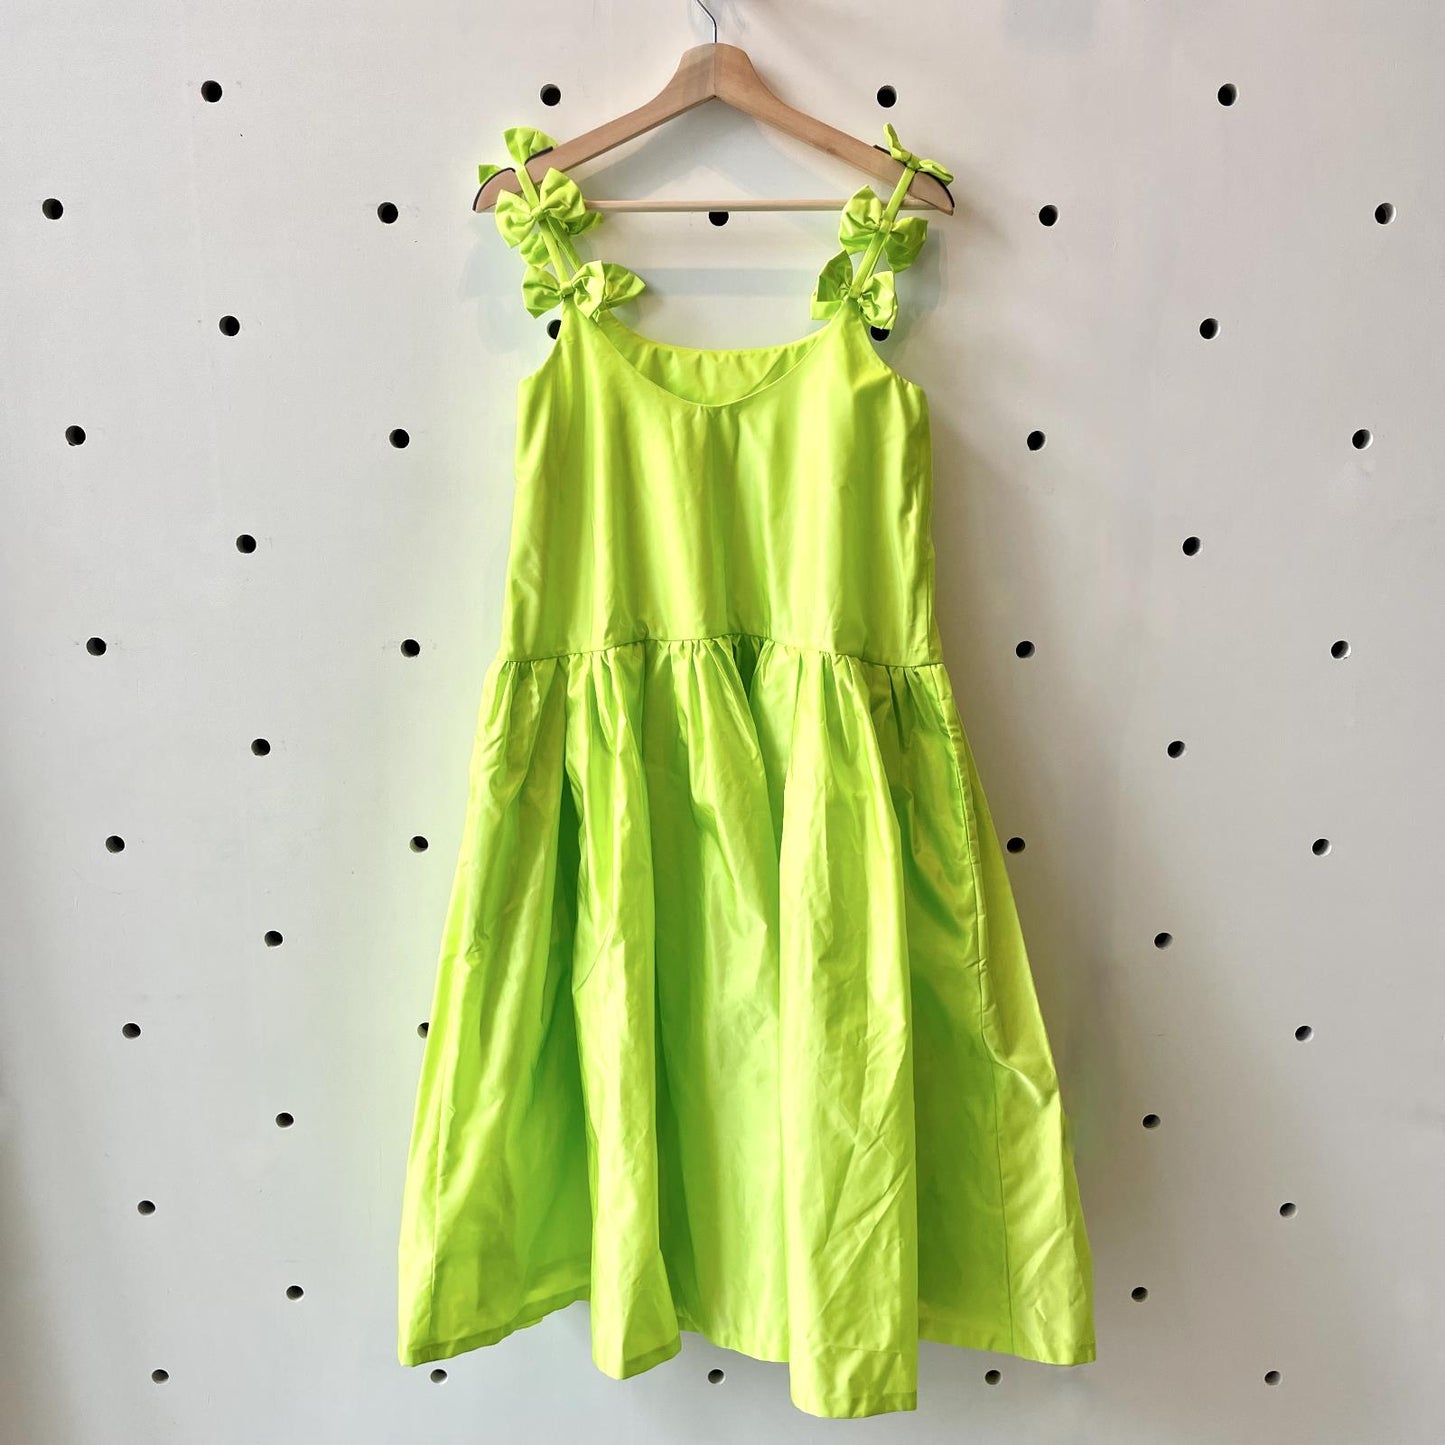 8 - G.E.M by Lazy Oaf NEW $165 Acid Lime Green Bow Strap Party Dress 0623GS